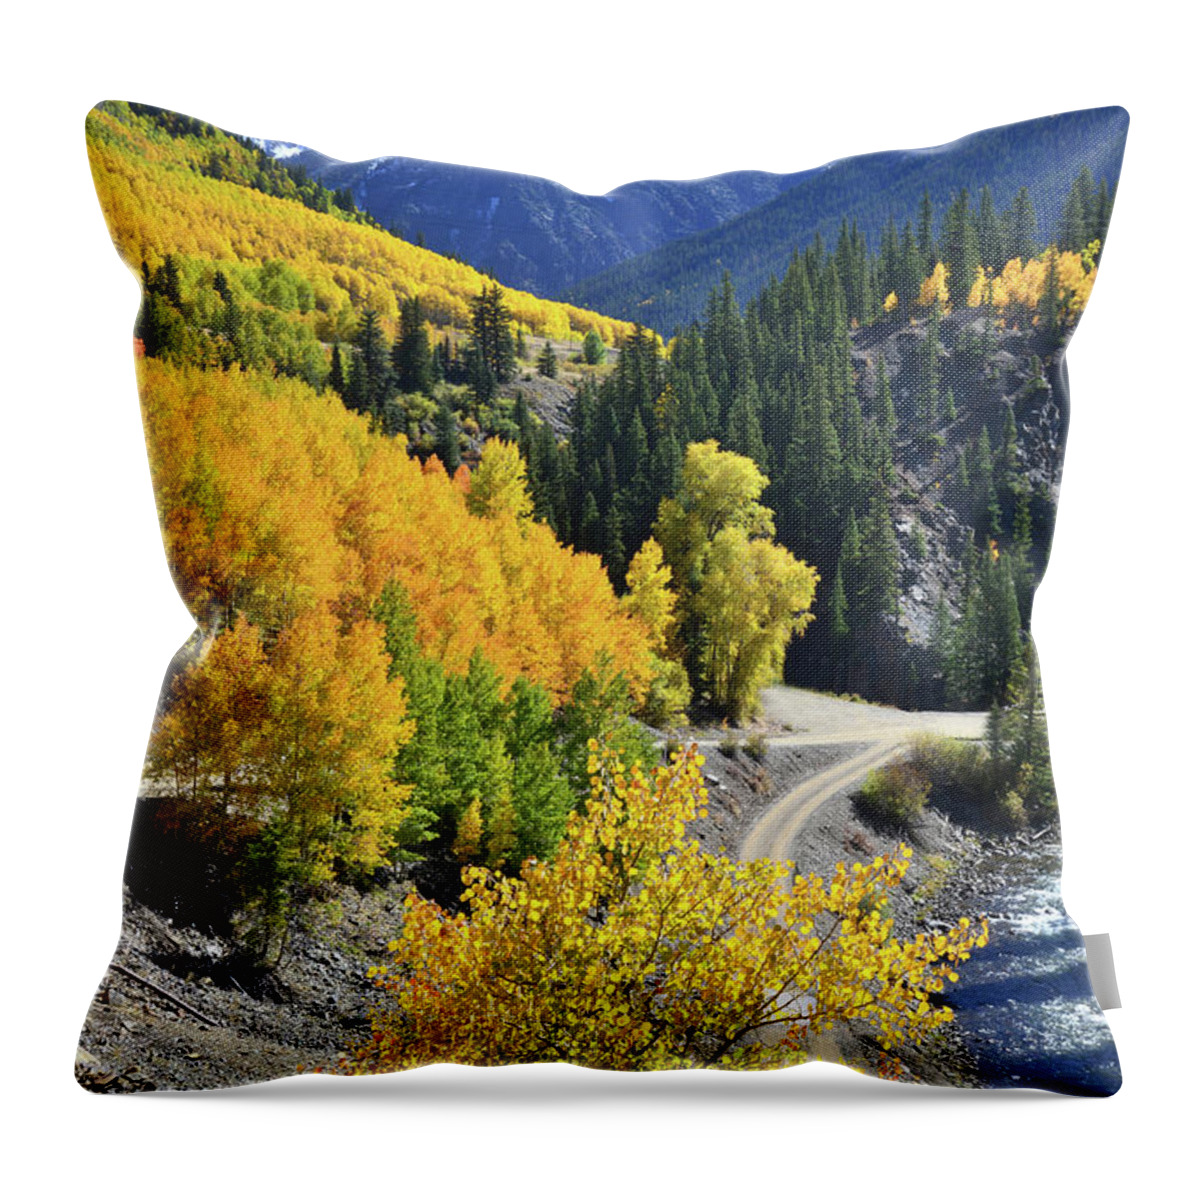 Colorado Throw Pillow featuring the photograph Going Off Road by Ray Mathis